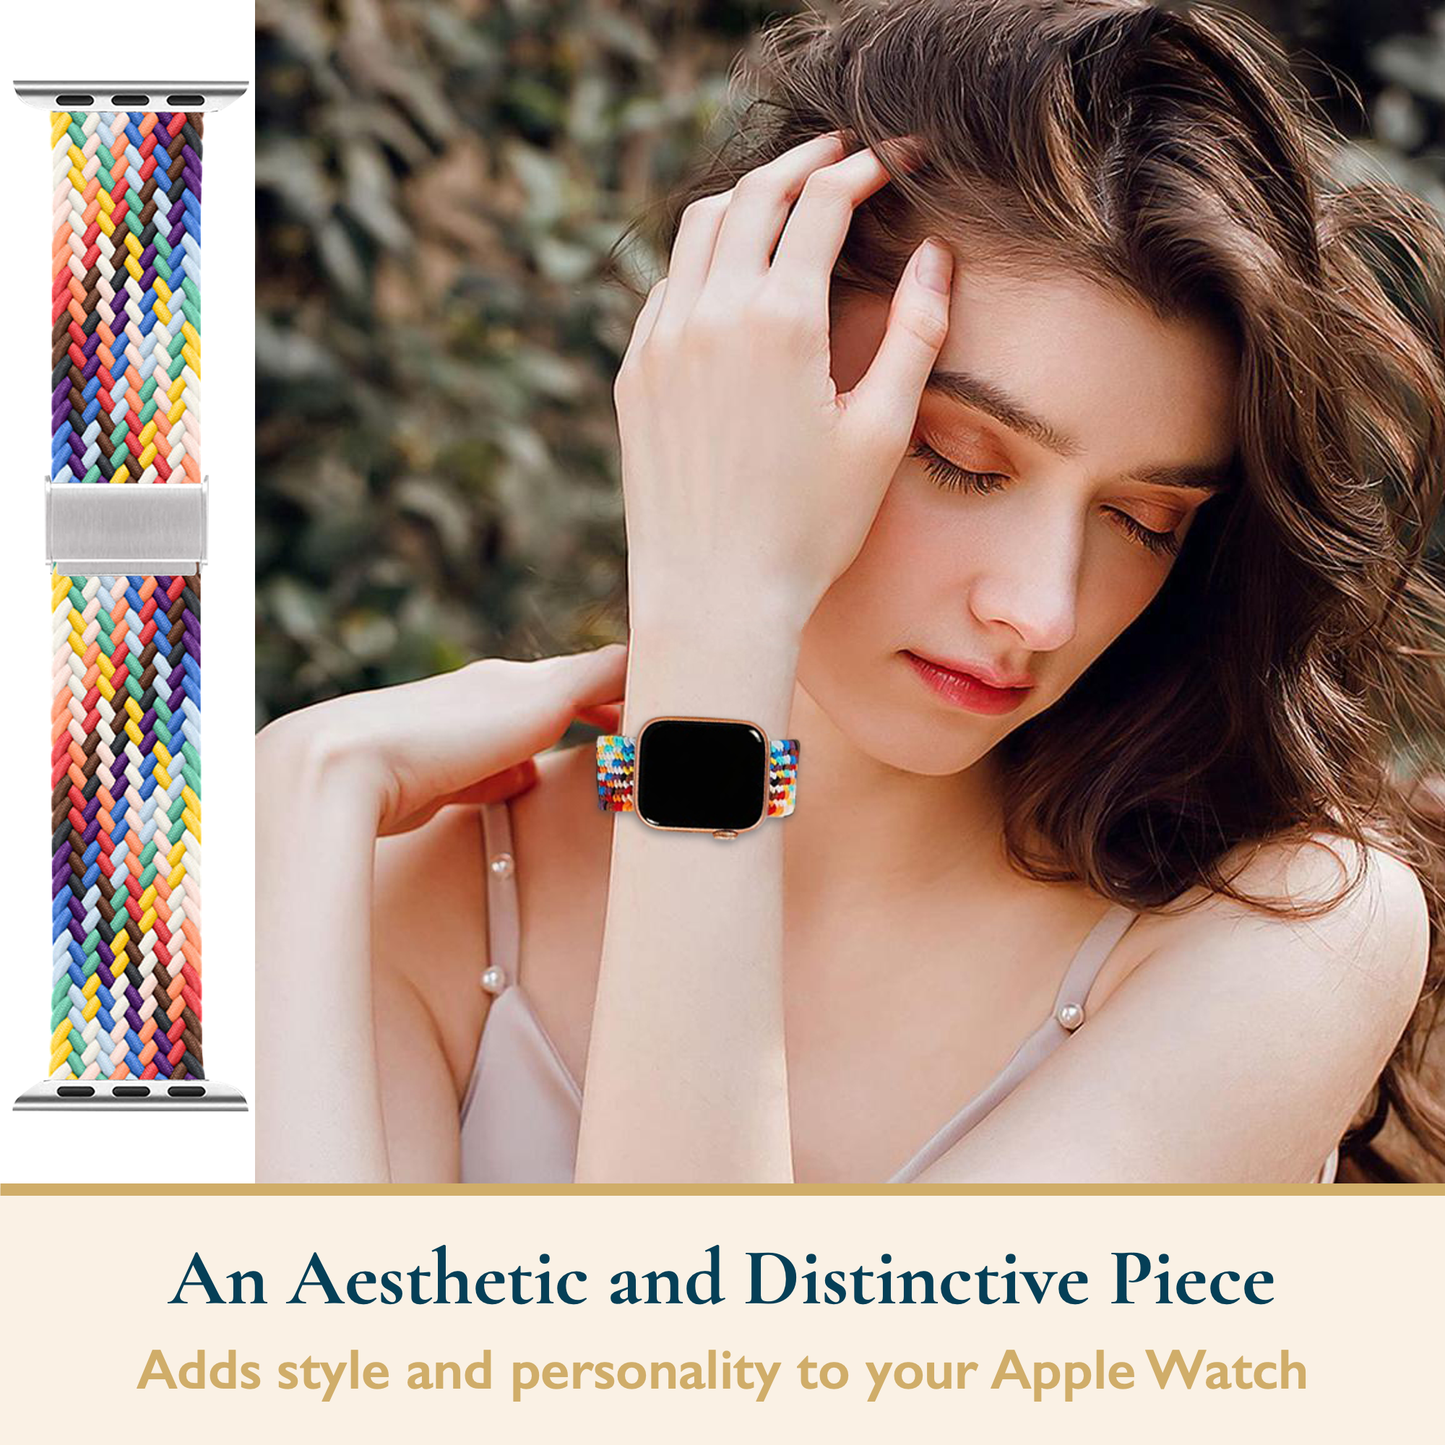 Braided Apple Watch Band With Adjustable Buckle